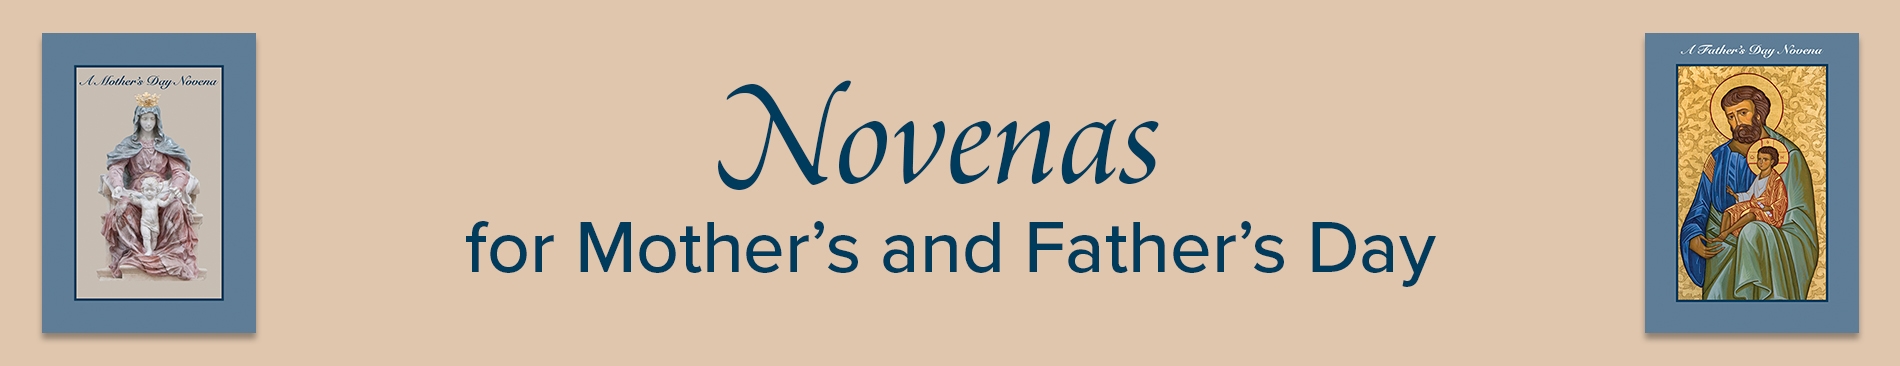 Novenas for Mother's and Father's Days